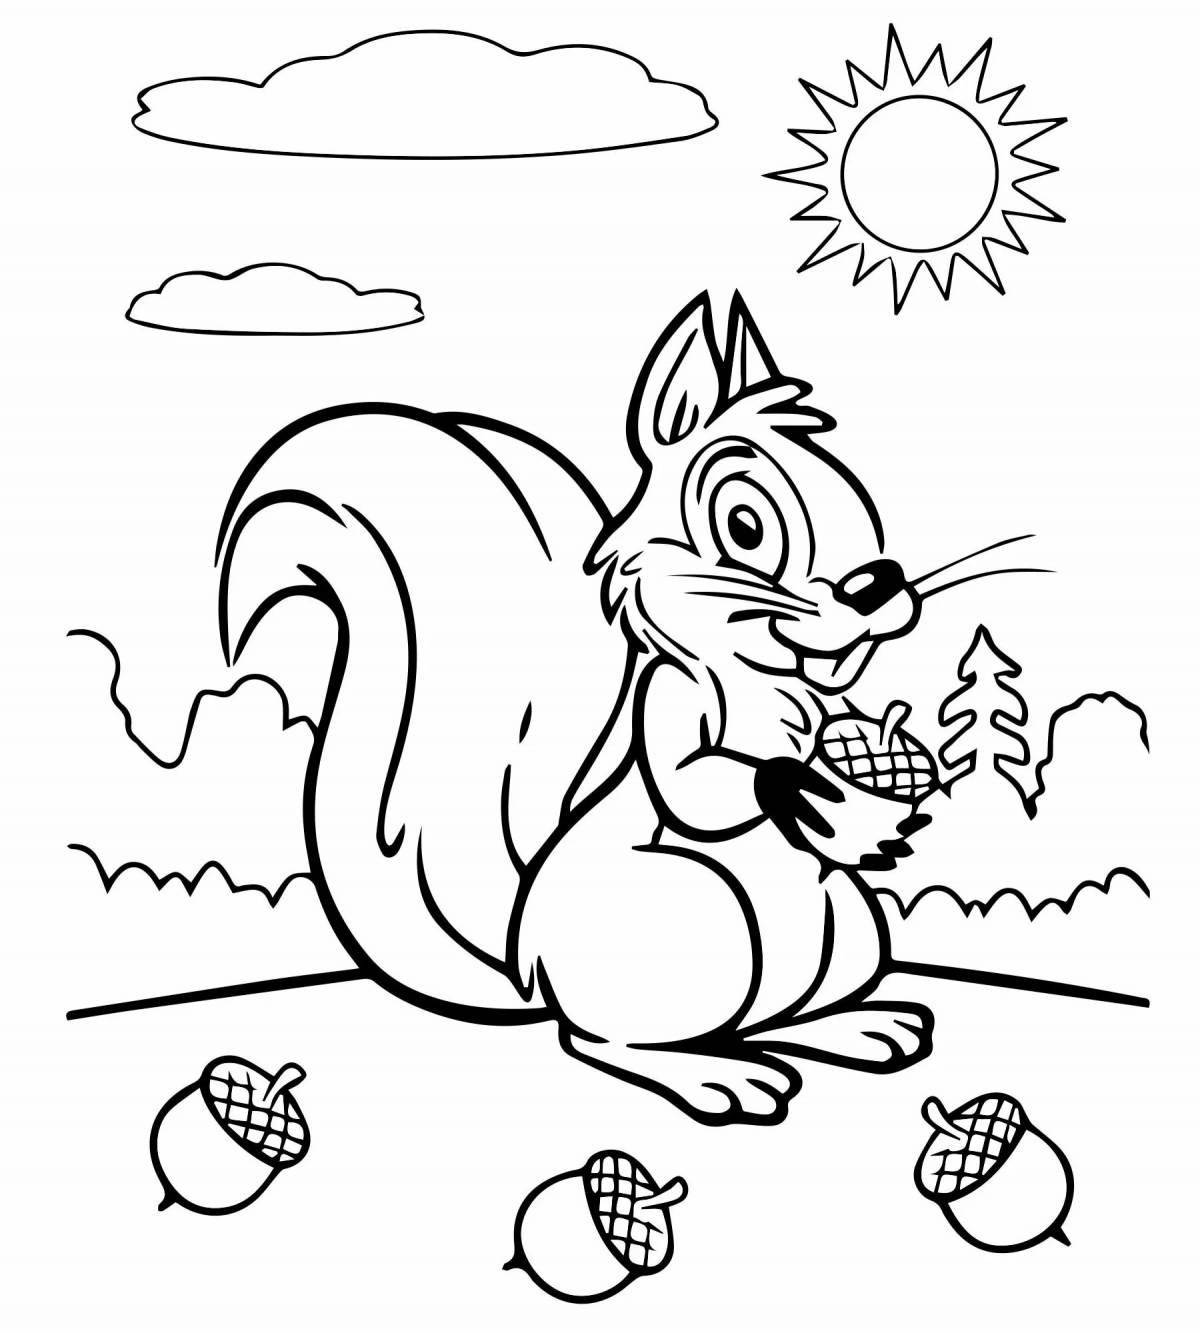 Bright squirrel coloring book for kids